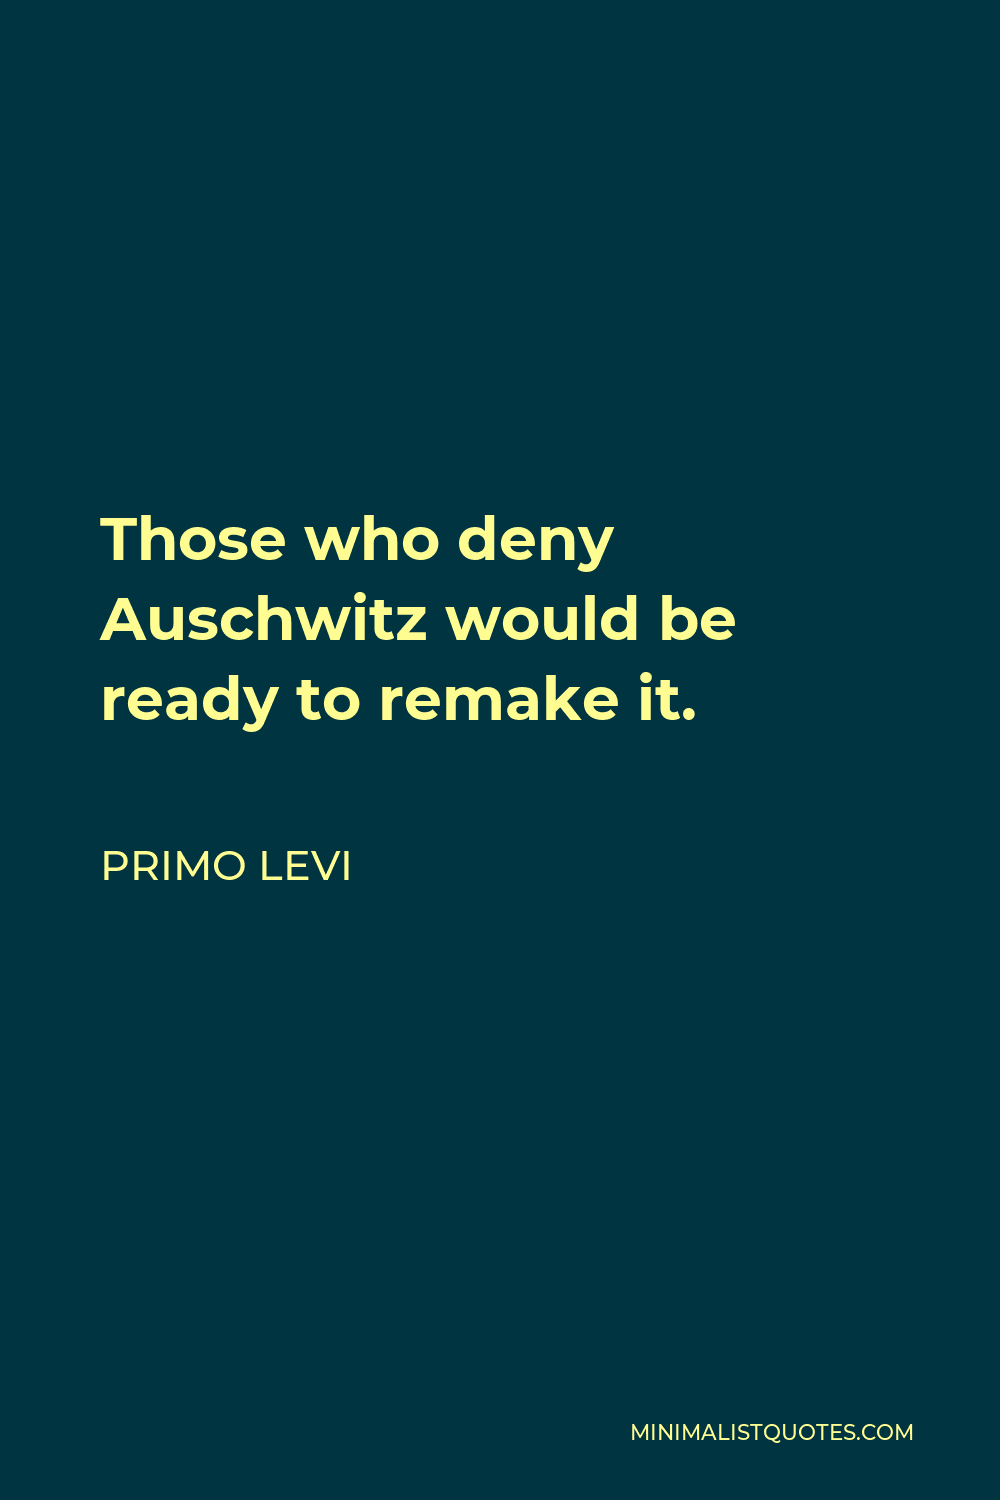 Primo Levi Quote - Those who deny Auschwitz would be ready to remake it.